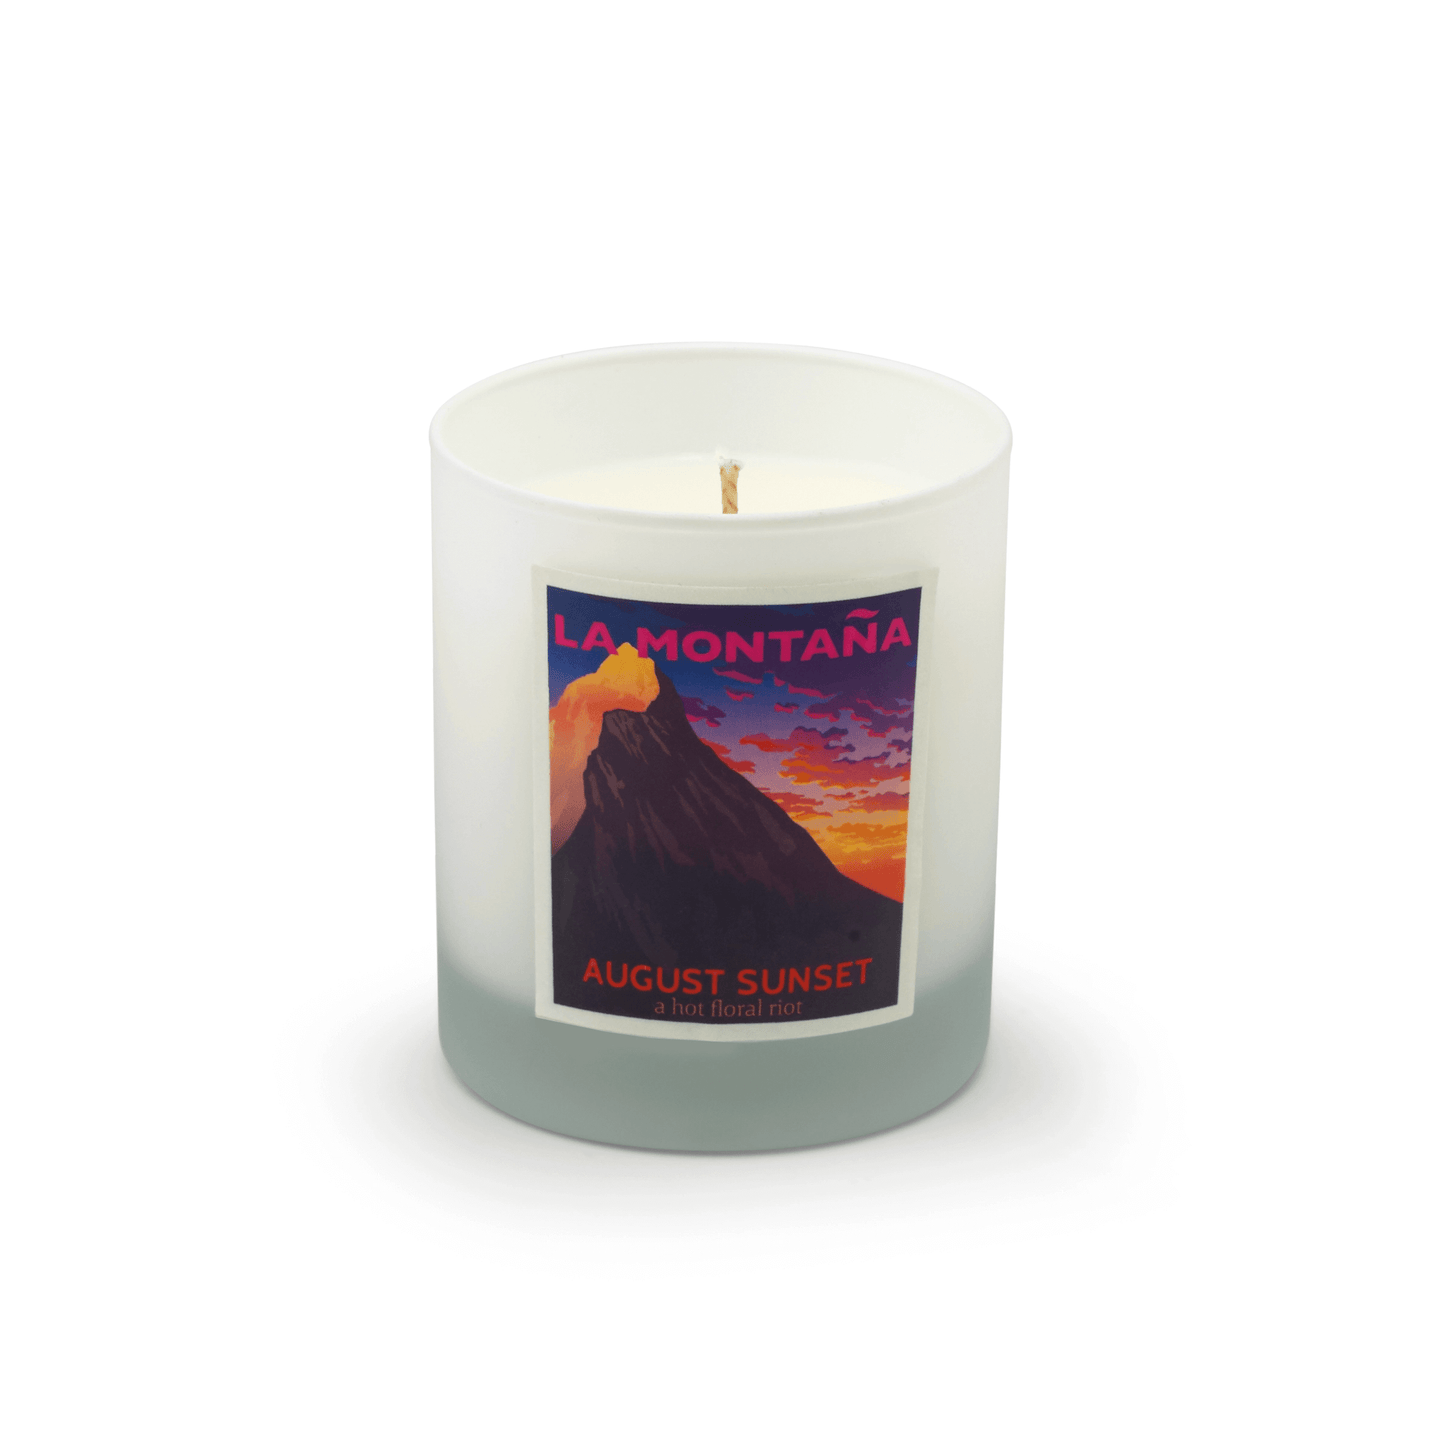 La Montaña August Sunset Scented Candle